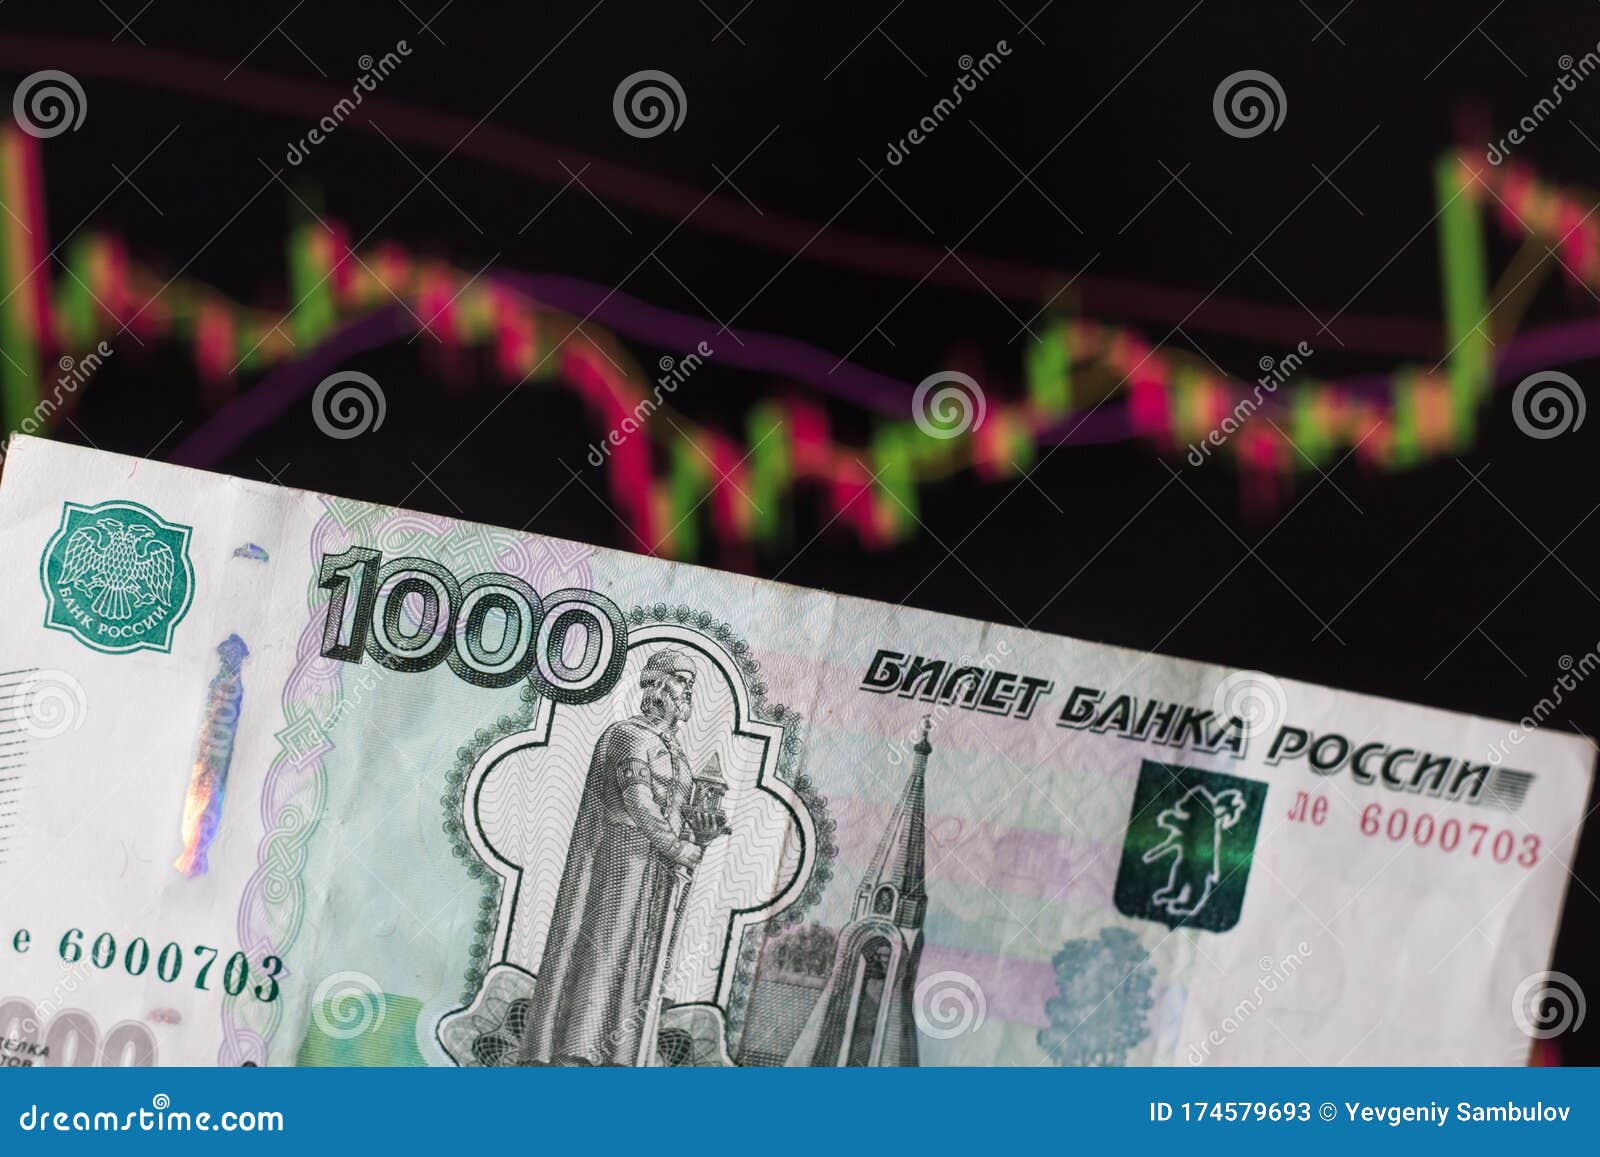 Forex currency ruble list of forex brokers in pakistan